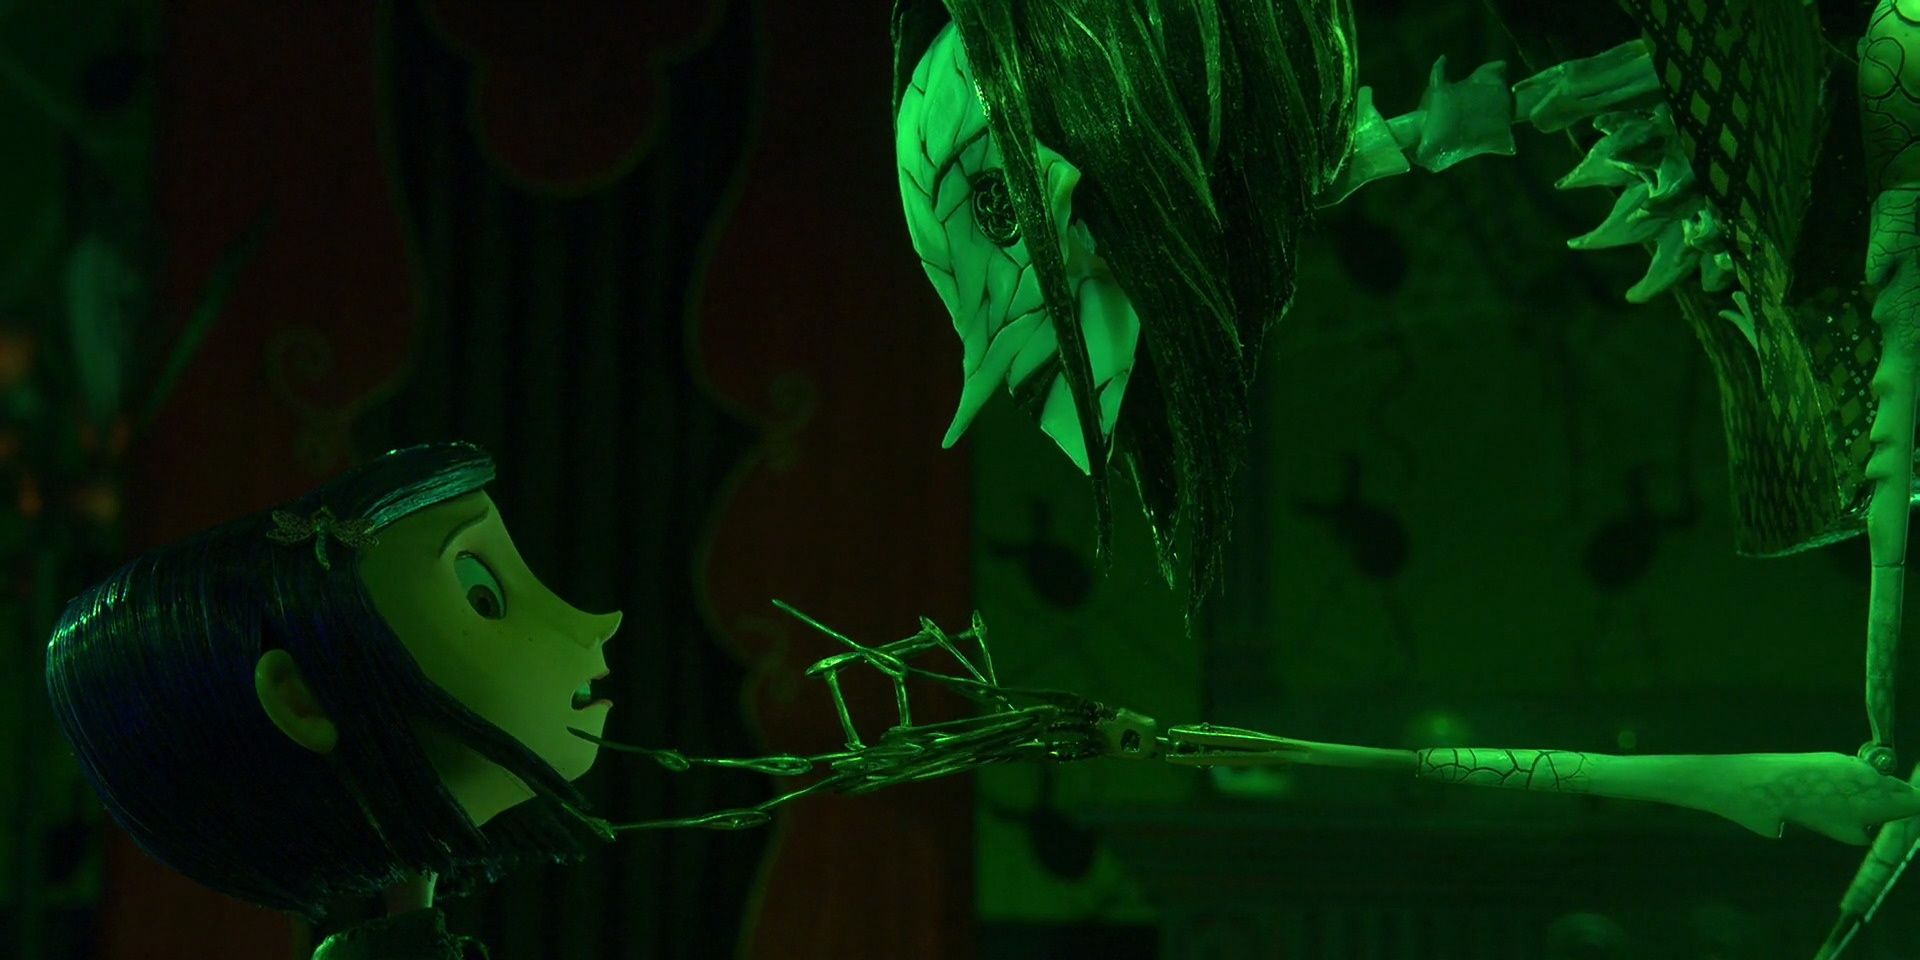 Coraline confronts the Other Mother in the Other World